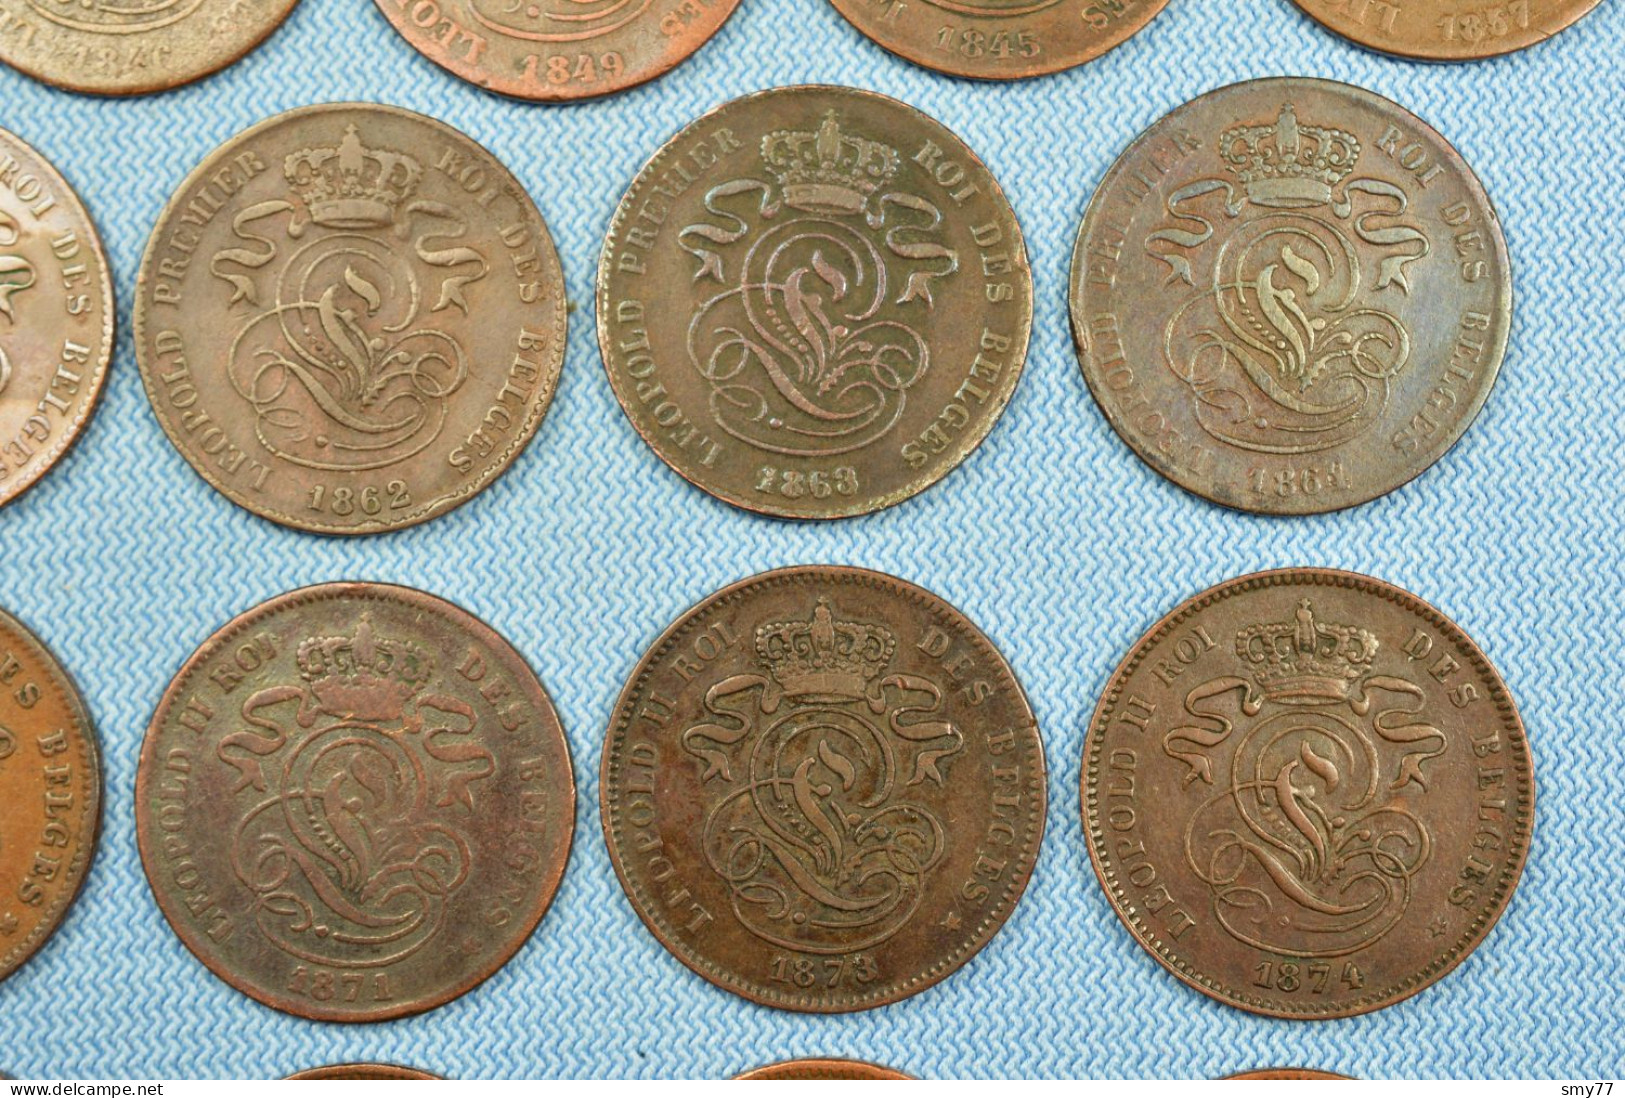 Belgique / Belgium • 21x • 2 centimes • ≥ 1835 • All different • some scarcer dates, overdates or high grades • [24-623]